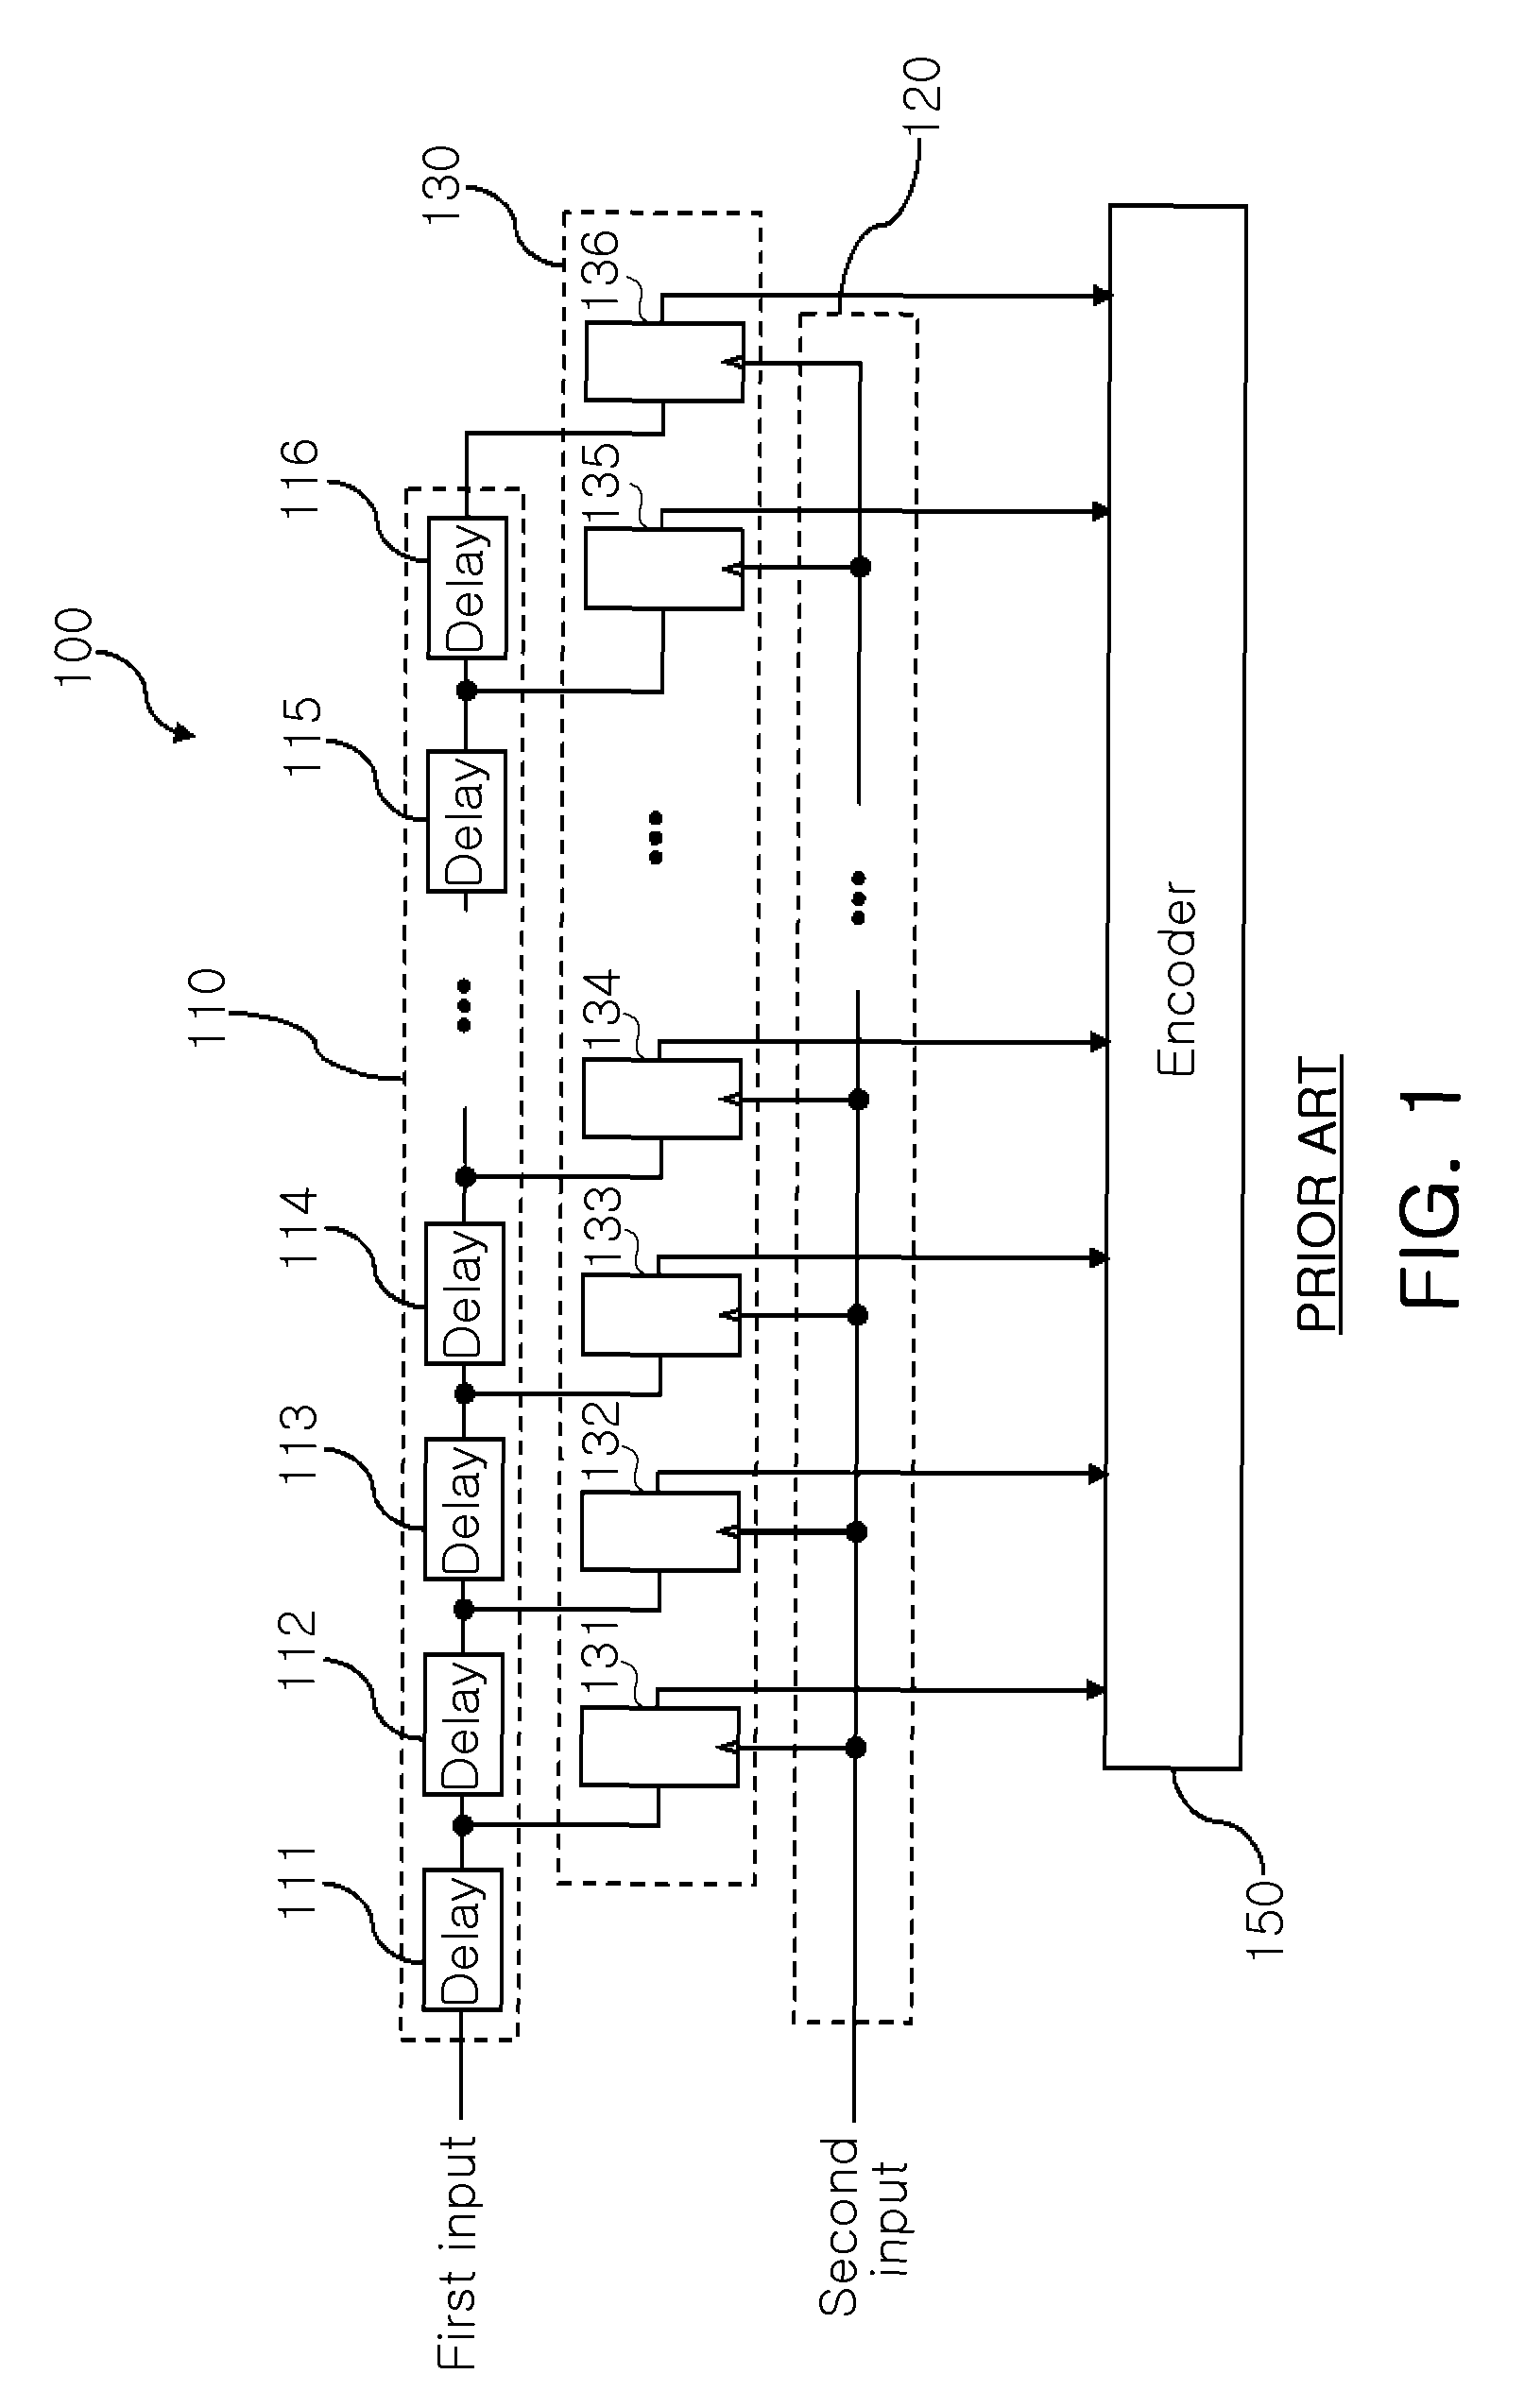 Apparatus for compensating for error of time-to-digital converter